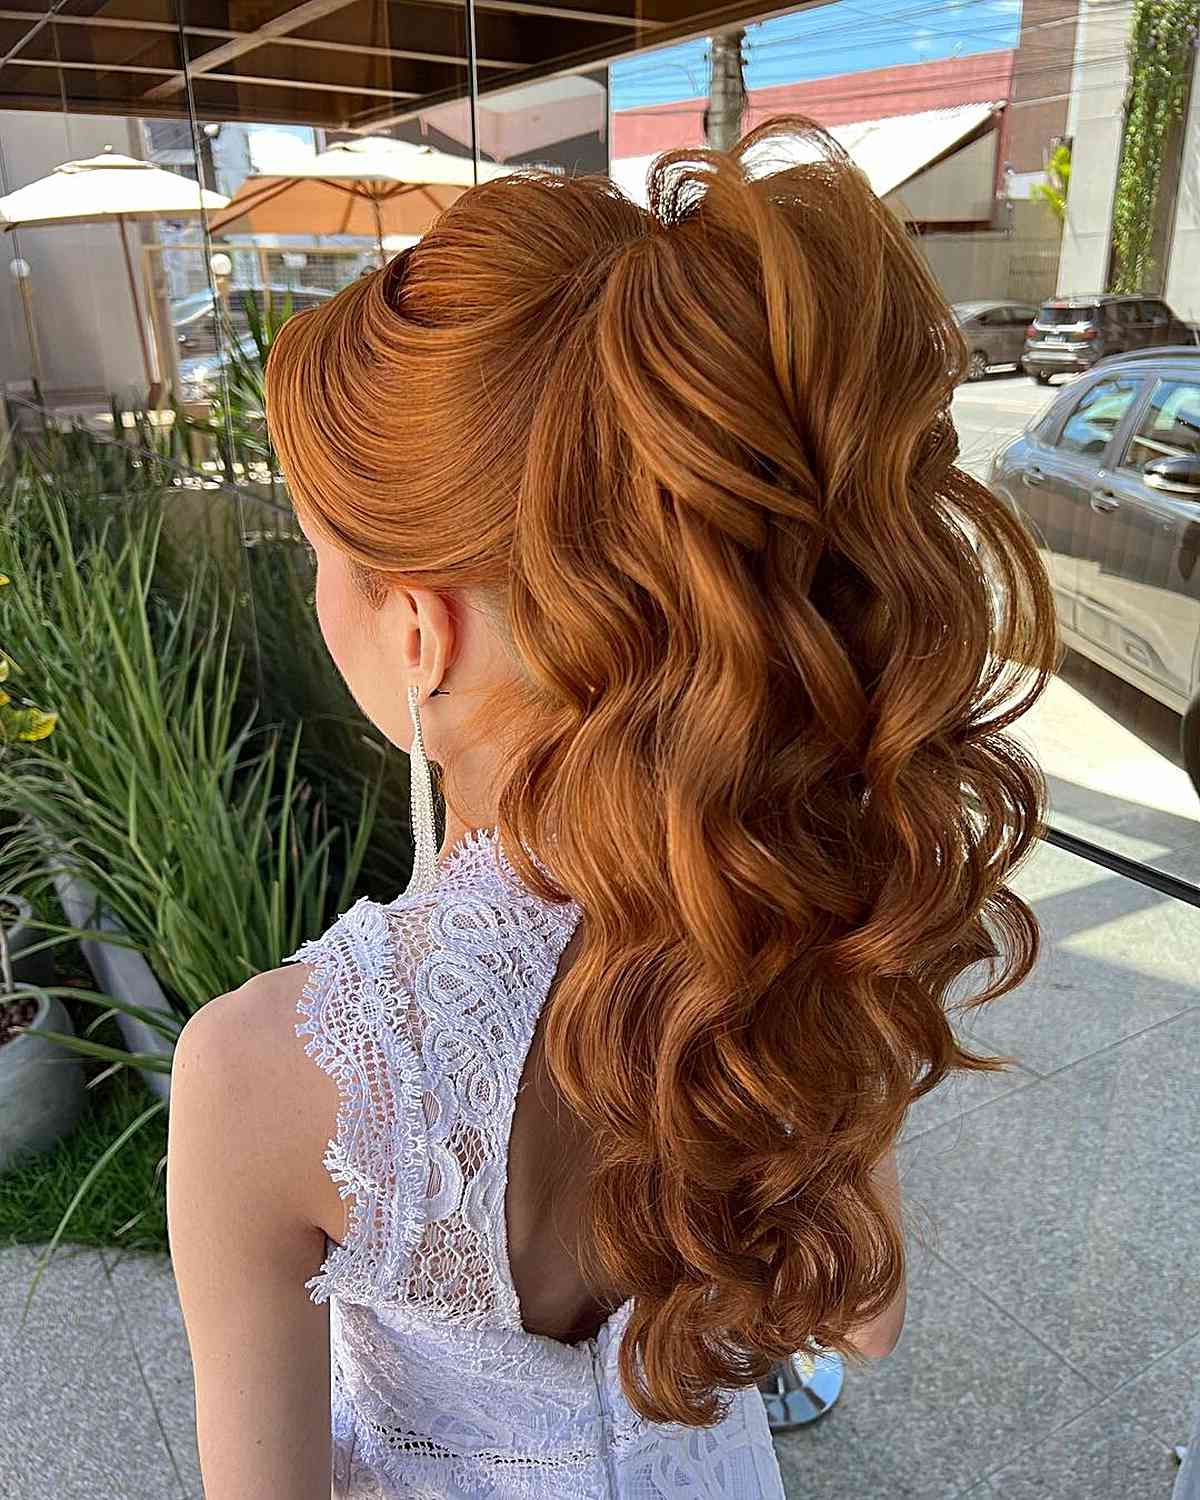 35 Gorgeous Bridesmaid Hairstyles For The Brides Big Day Regarding Bridesmaid’s Updo For Long Hair (View 18 of 25)